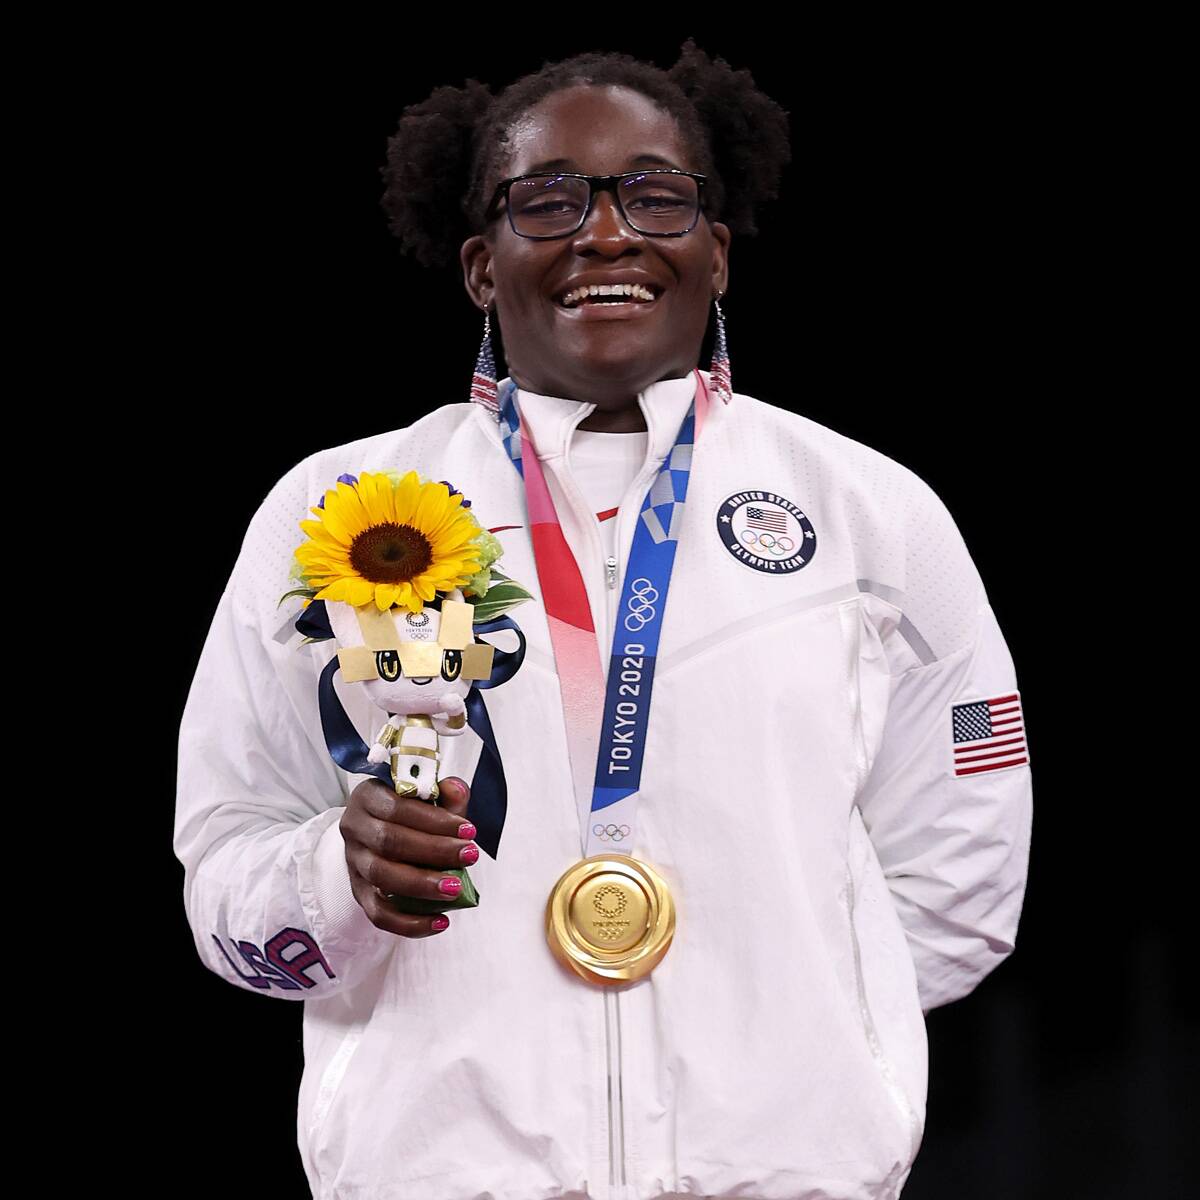 Tamyra Mensah-Stock Becomes First Black Woman to Win Olympic Gold in Wrestling